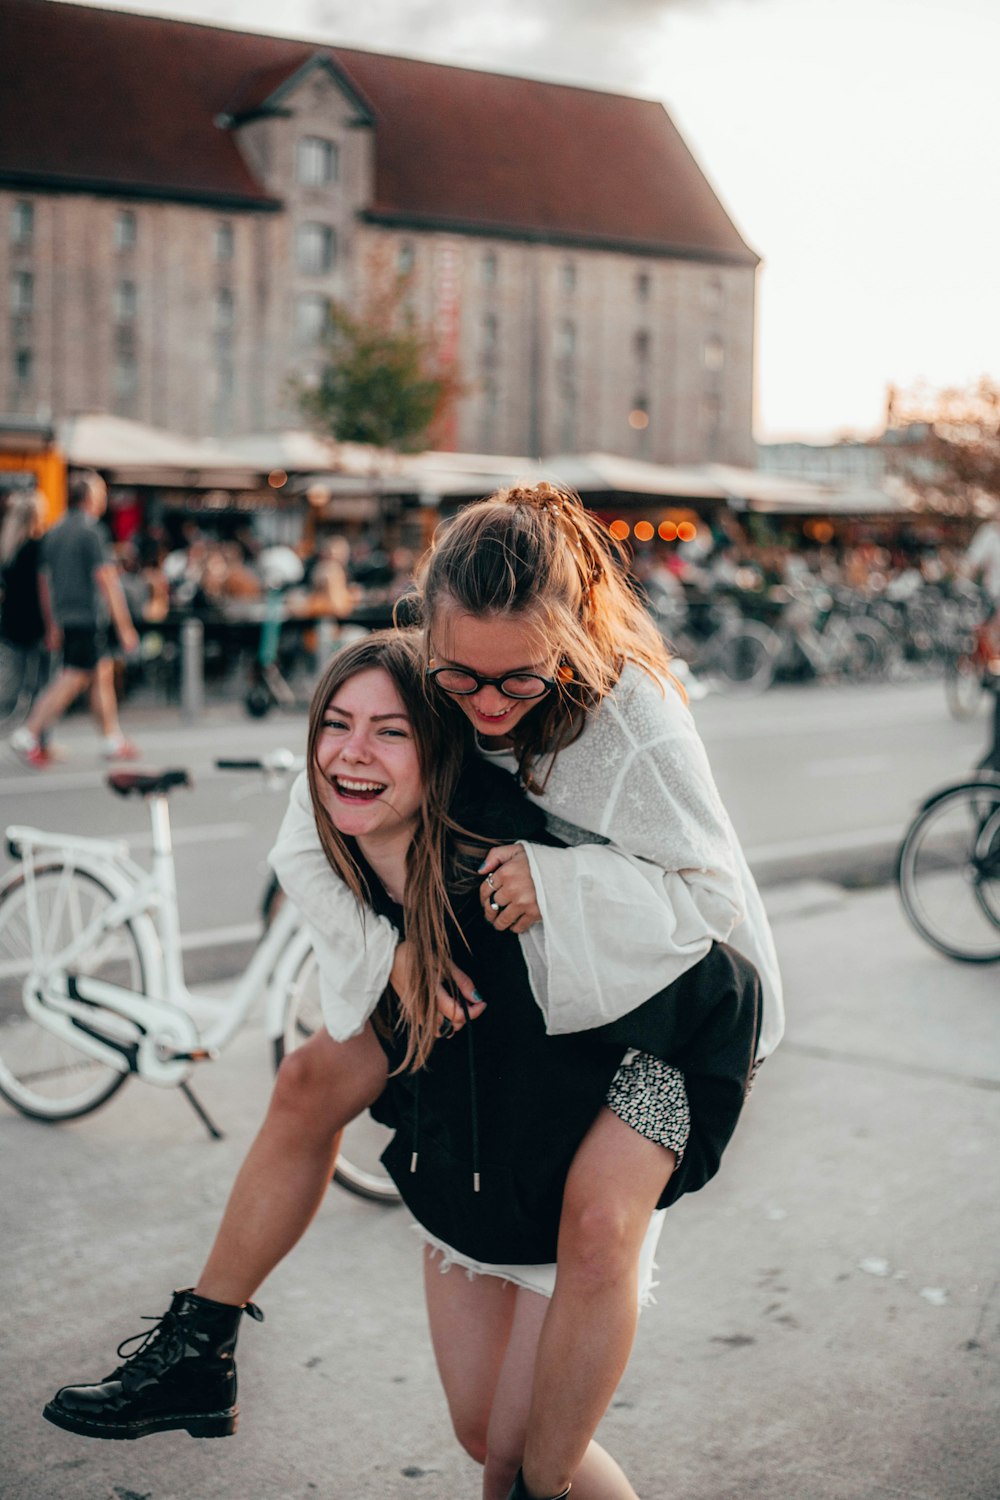 woman piggy back riding another woman